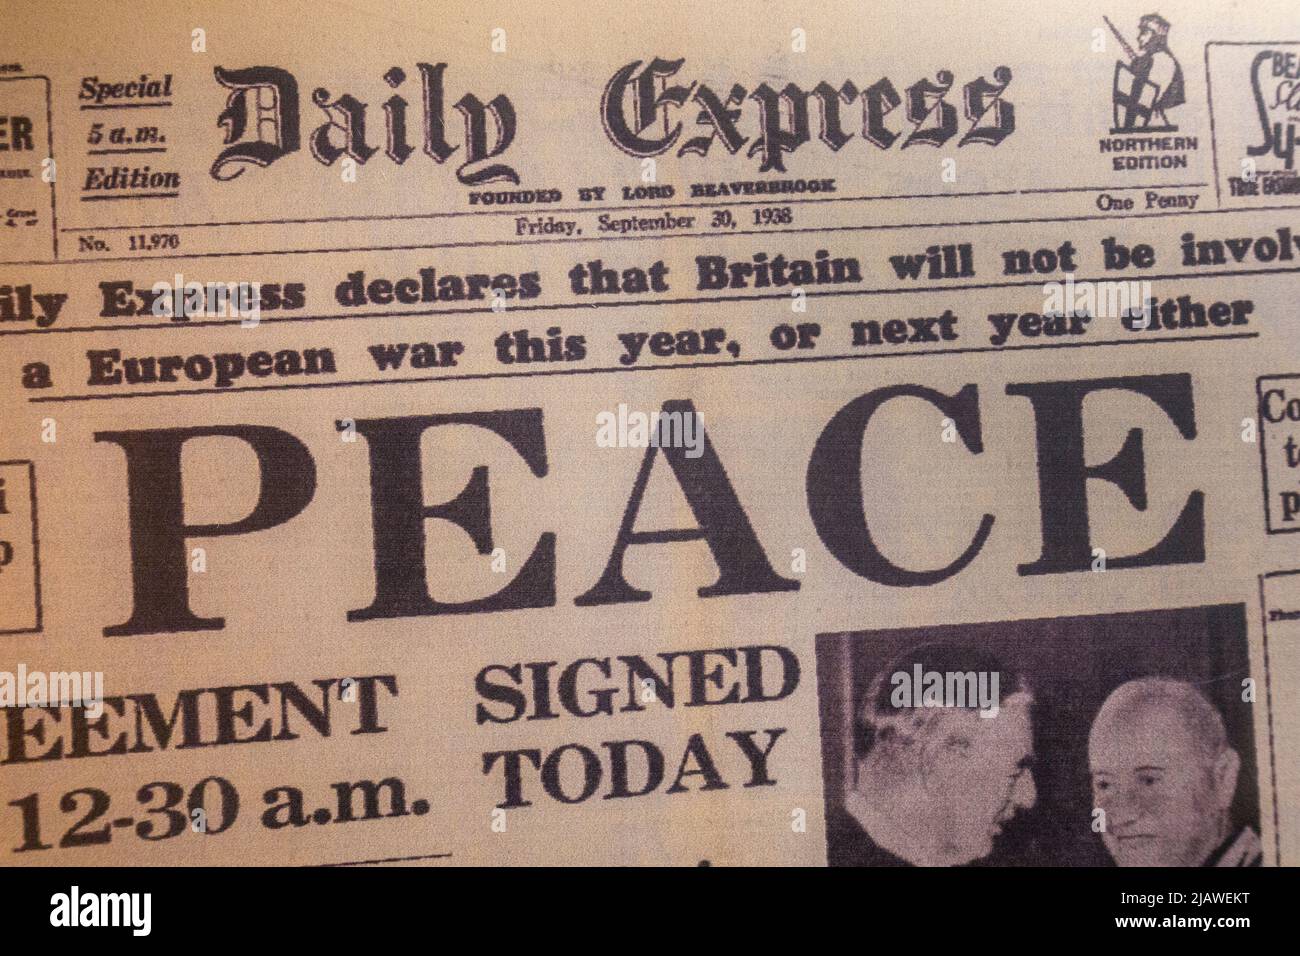 "Peace" headline in the Daily Express newspaper on 30th September 1938 after Neville Chamberlain signed the Munich Agreement with Nazi Germany. Stock Photo